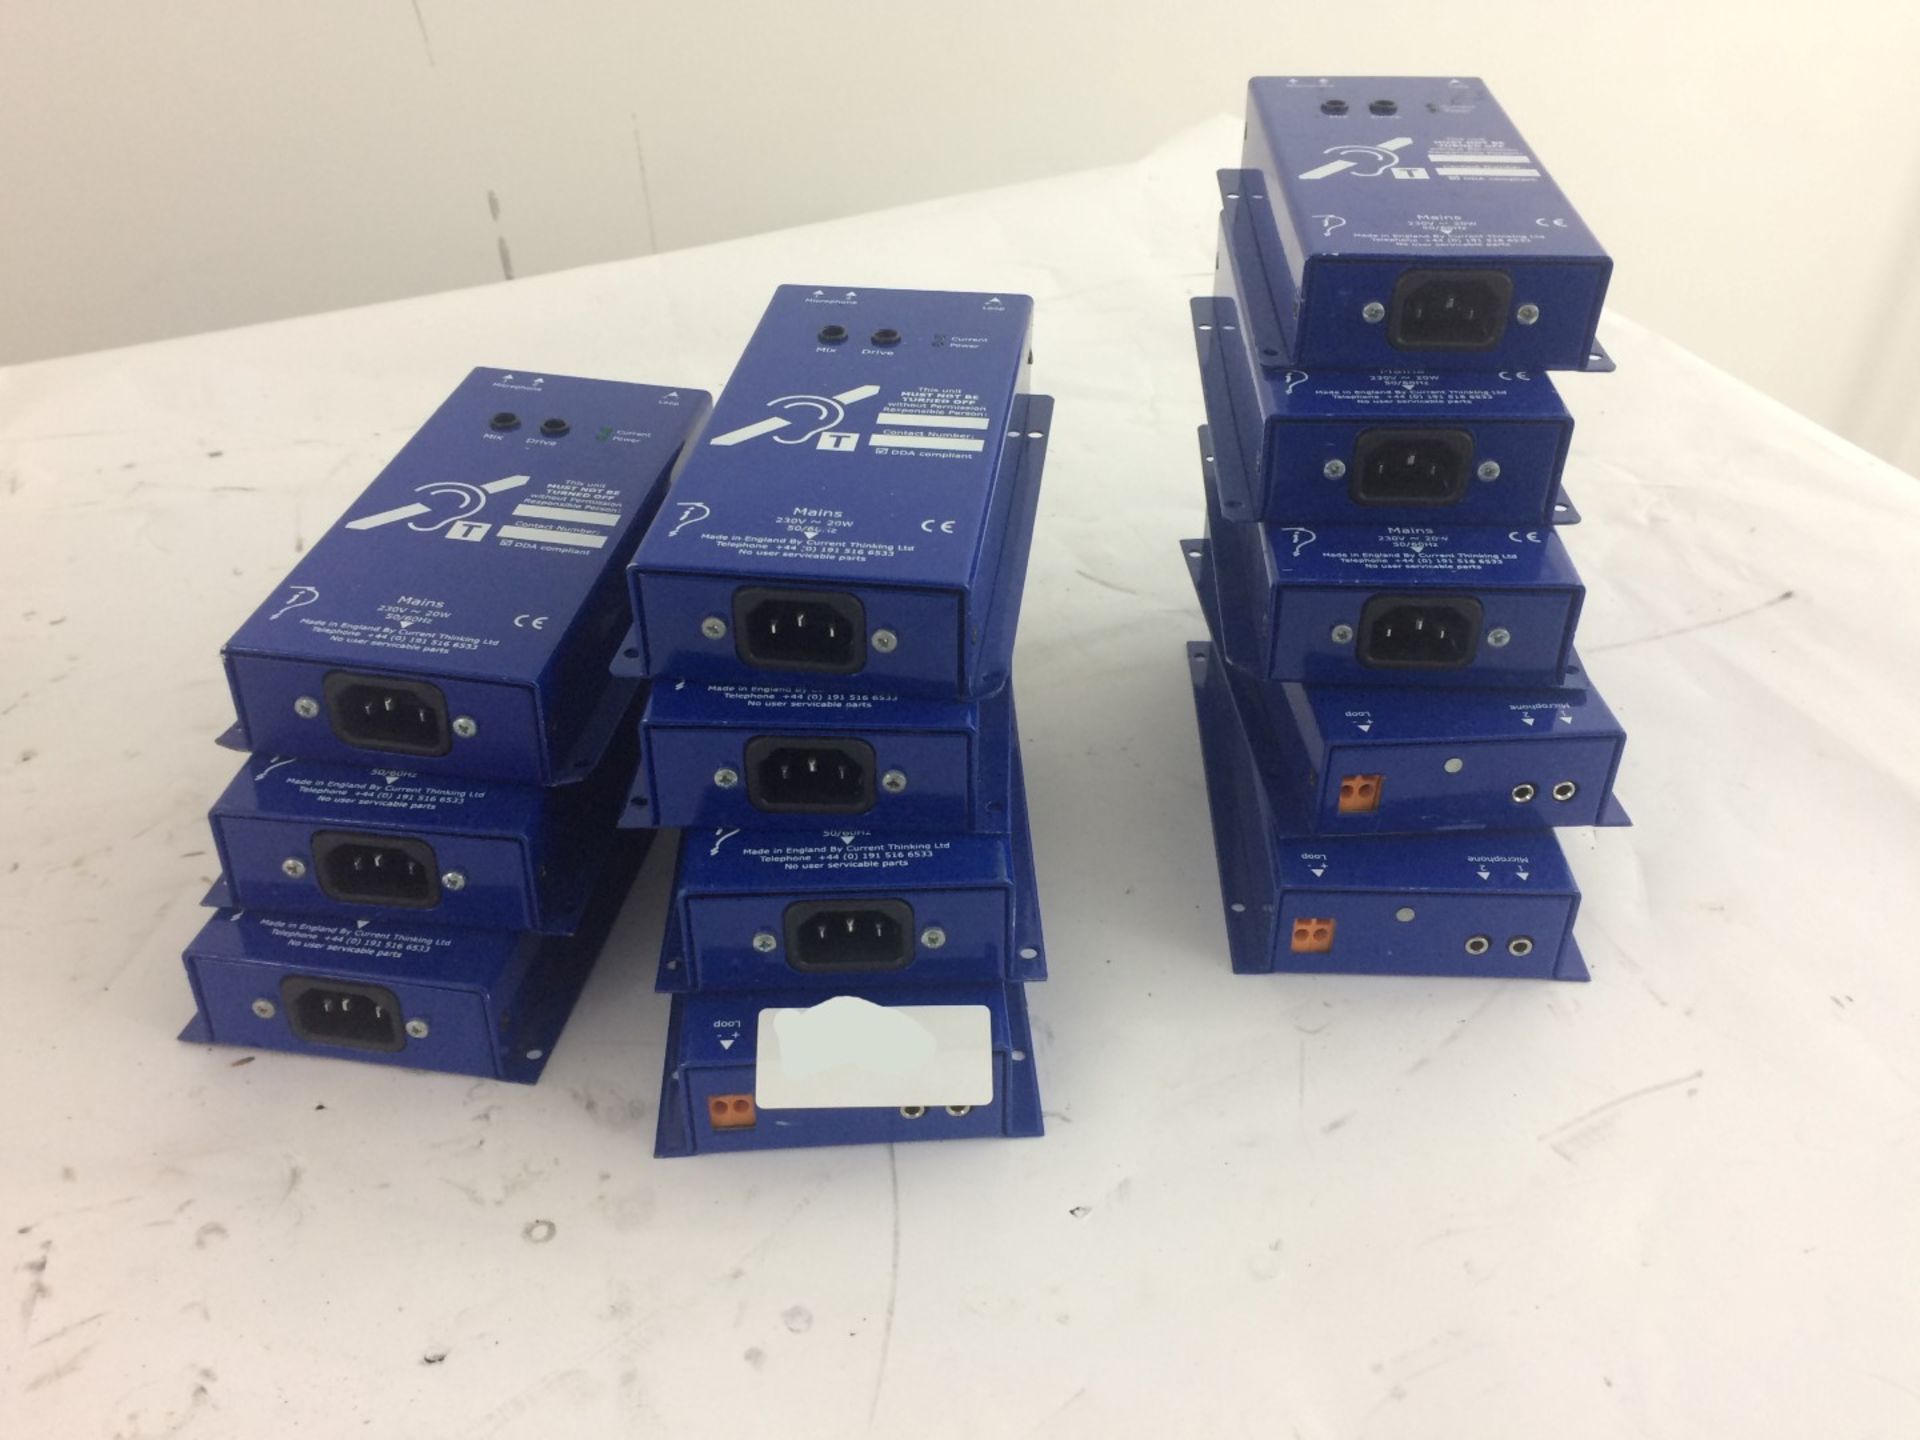 12 x INDUCTION LOOP SYSTEM INDUCTION BOXES Including CABLES (IN BOX) - Ref: 759 - CL581 -